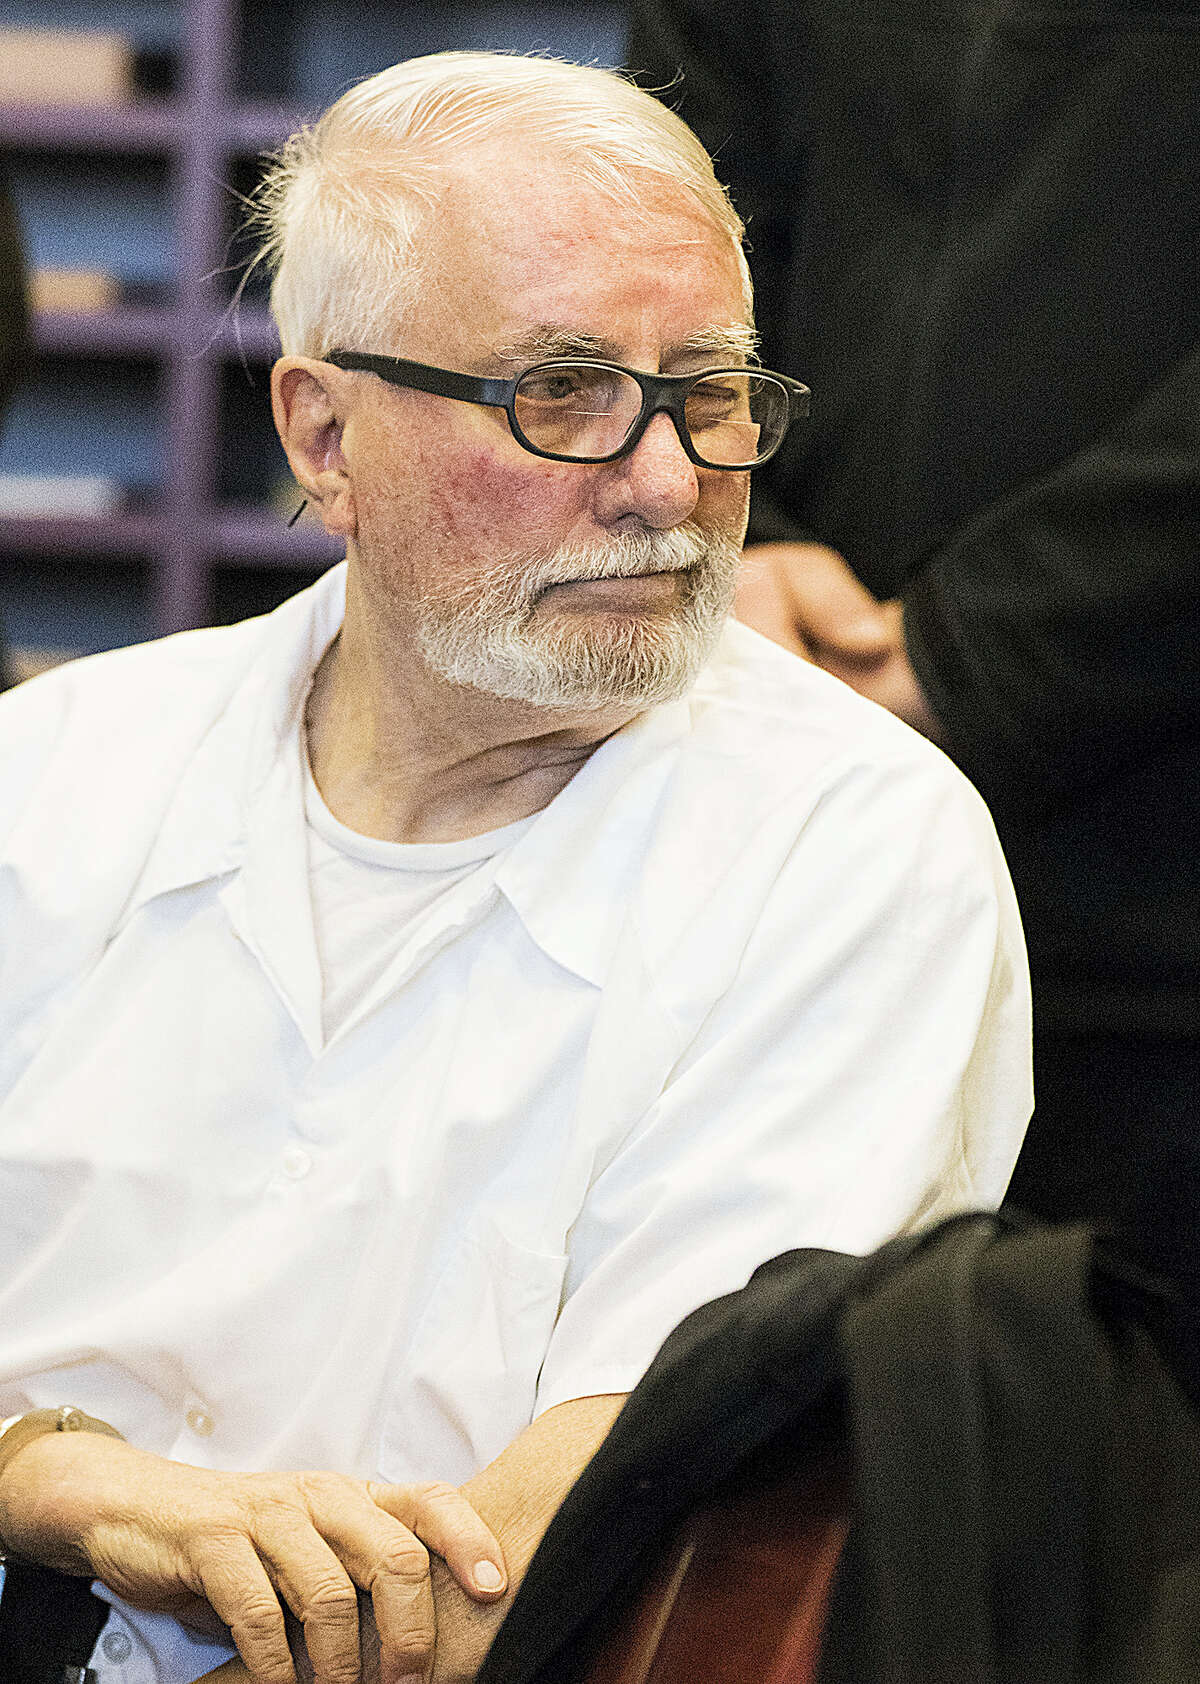 Jack McCullough winks at his stepdaughter Janey O’Connor behind him as he sits during a hearing in the DeKalb County Courthouse on Friday, April 15, 2016 in Sycamore, Ill. McCullough who a prosecutor says was wrongly convicted in the 1957 killing of an Illinois schoolgirl was released Friday shortly after a judge vacated his conviction, meaning that one of the oldest cold cases to be tried in U.S. history has officially gone cold again.